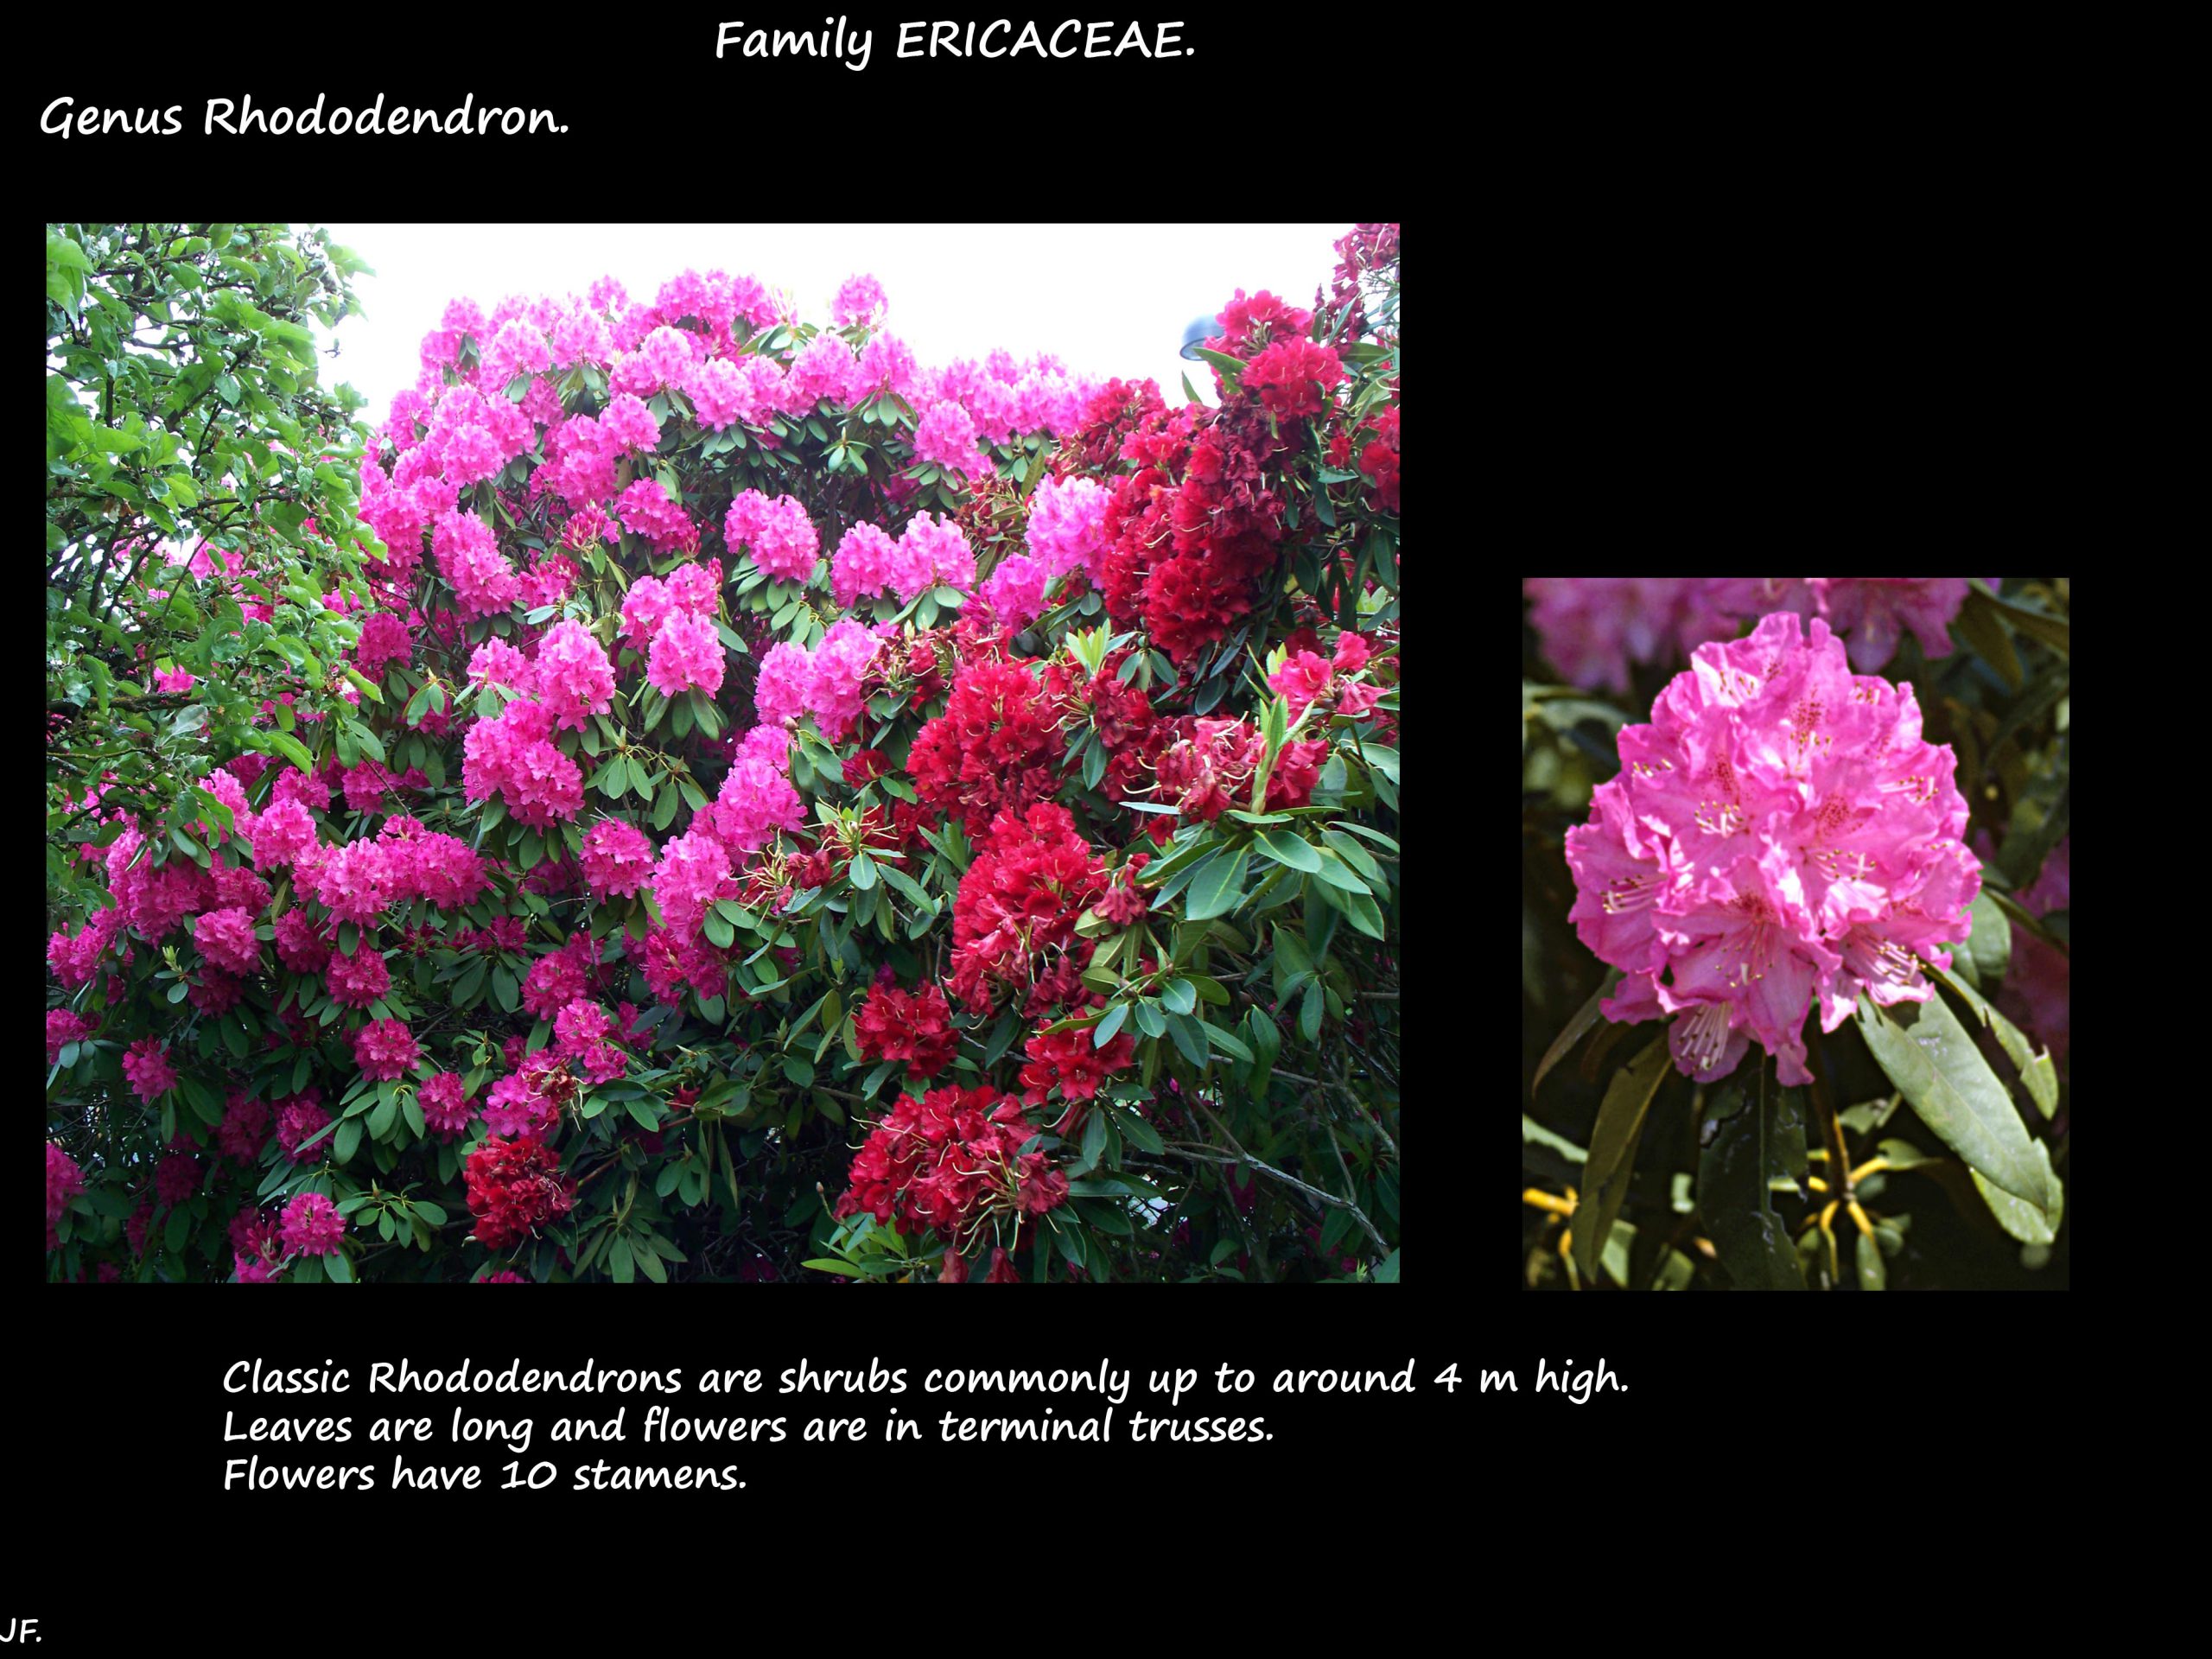 1 Classic Rhododendrons